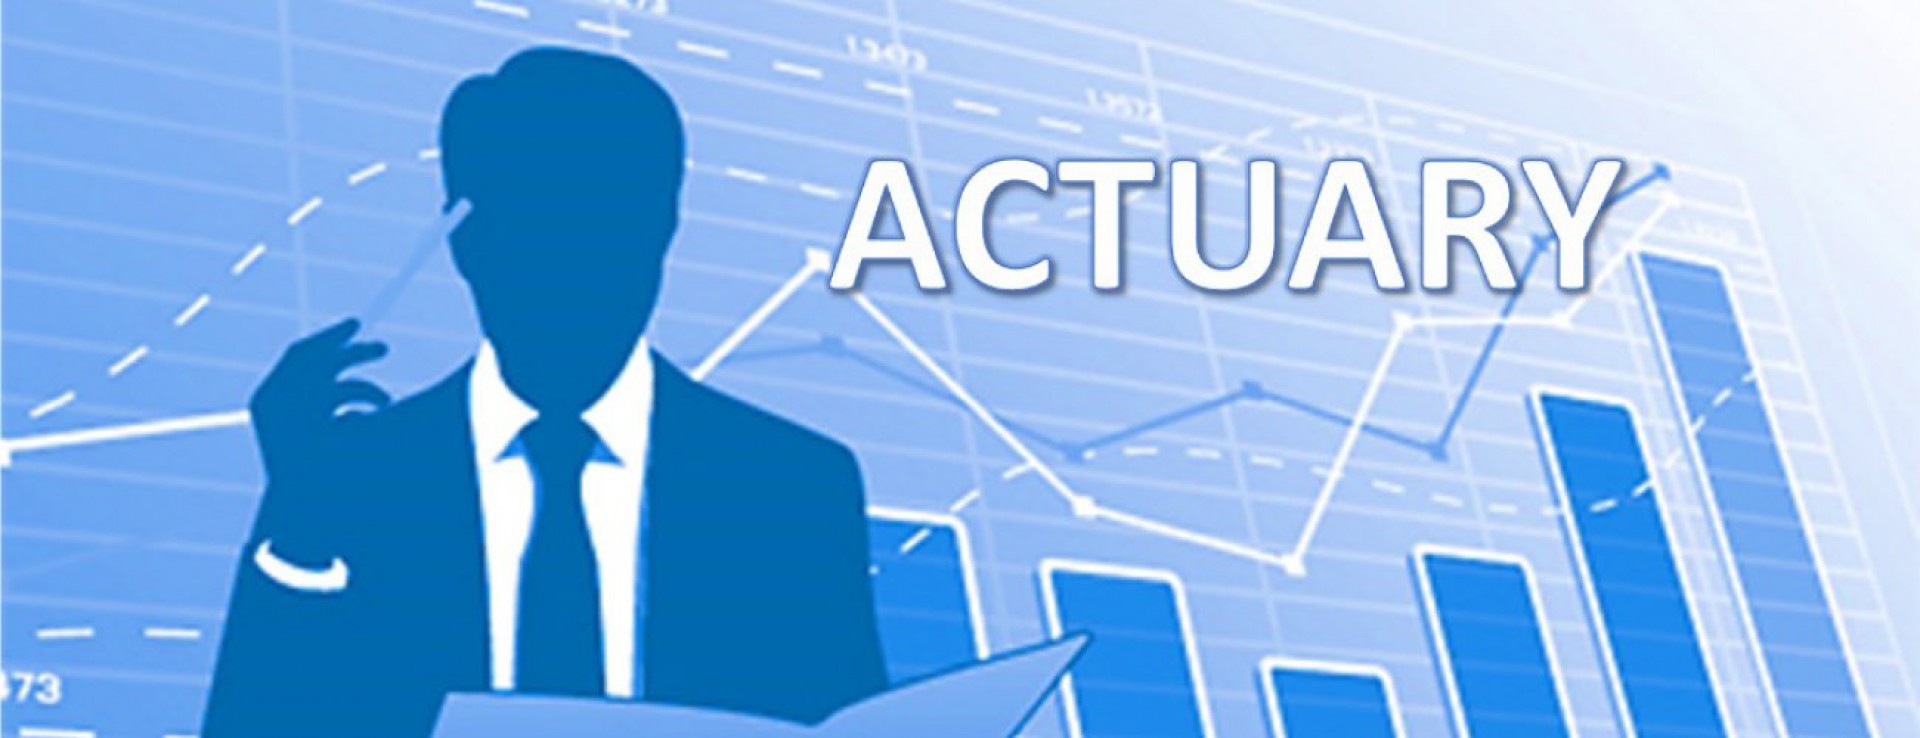 actuary banner50